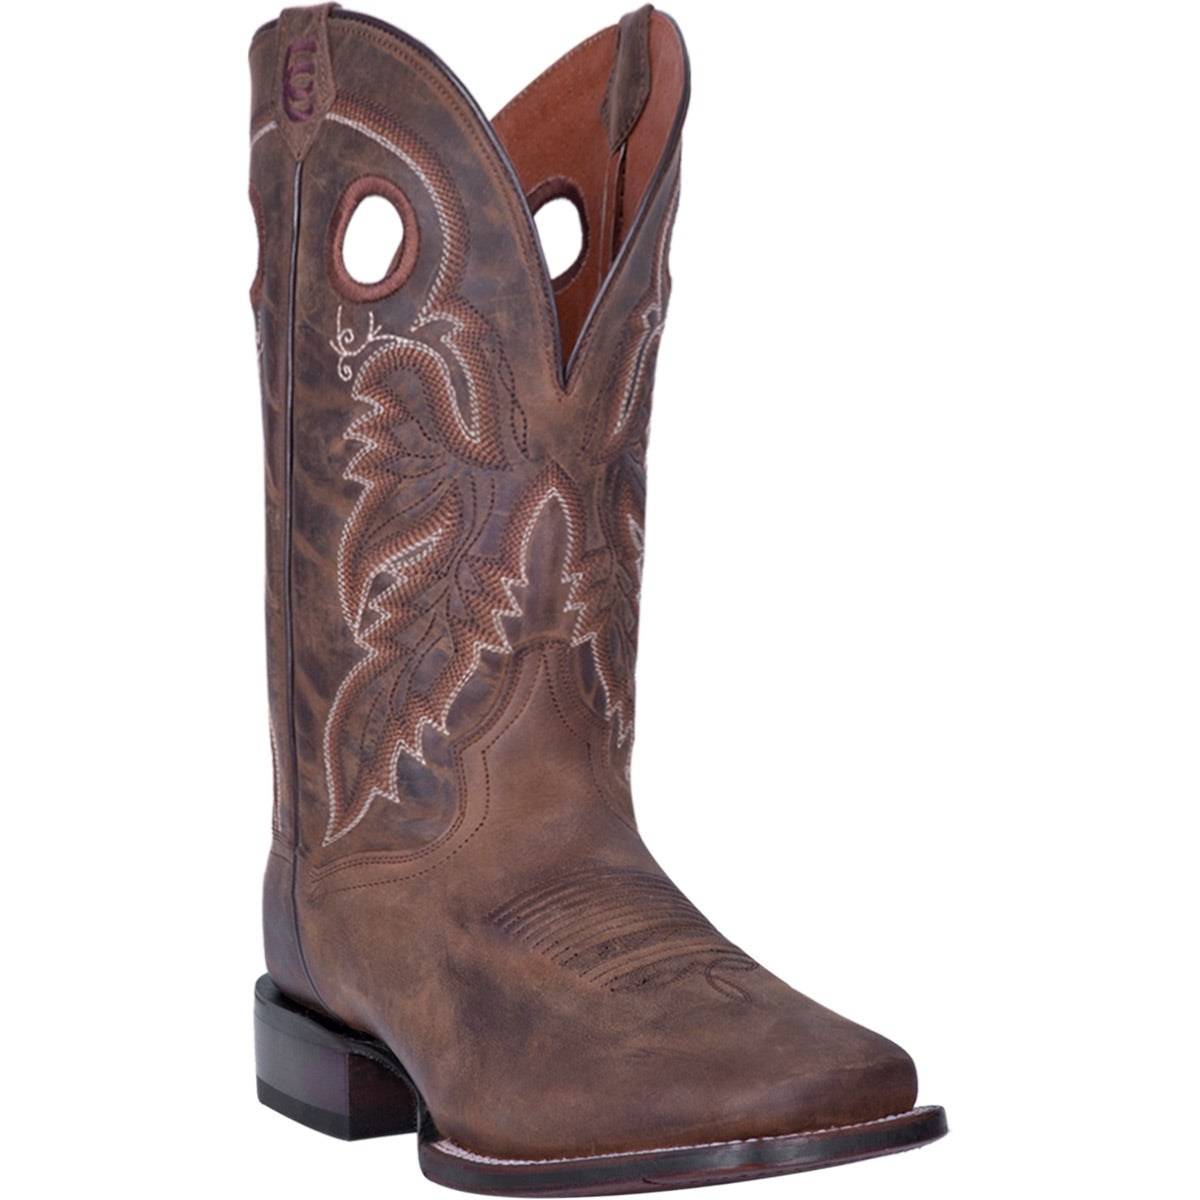 Our Cowboy Certified boots are comfortable and well made. The Abram is made of premium leather with traditional western pull holes for easy on. The rubber Cavvy outsole is lightweight and good on all surfaces. Abram is a great everyday ranch to town boot.  Style: DP4562